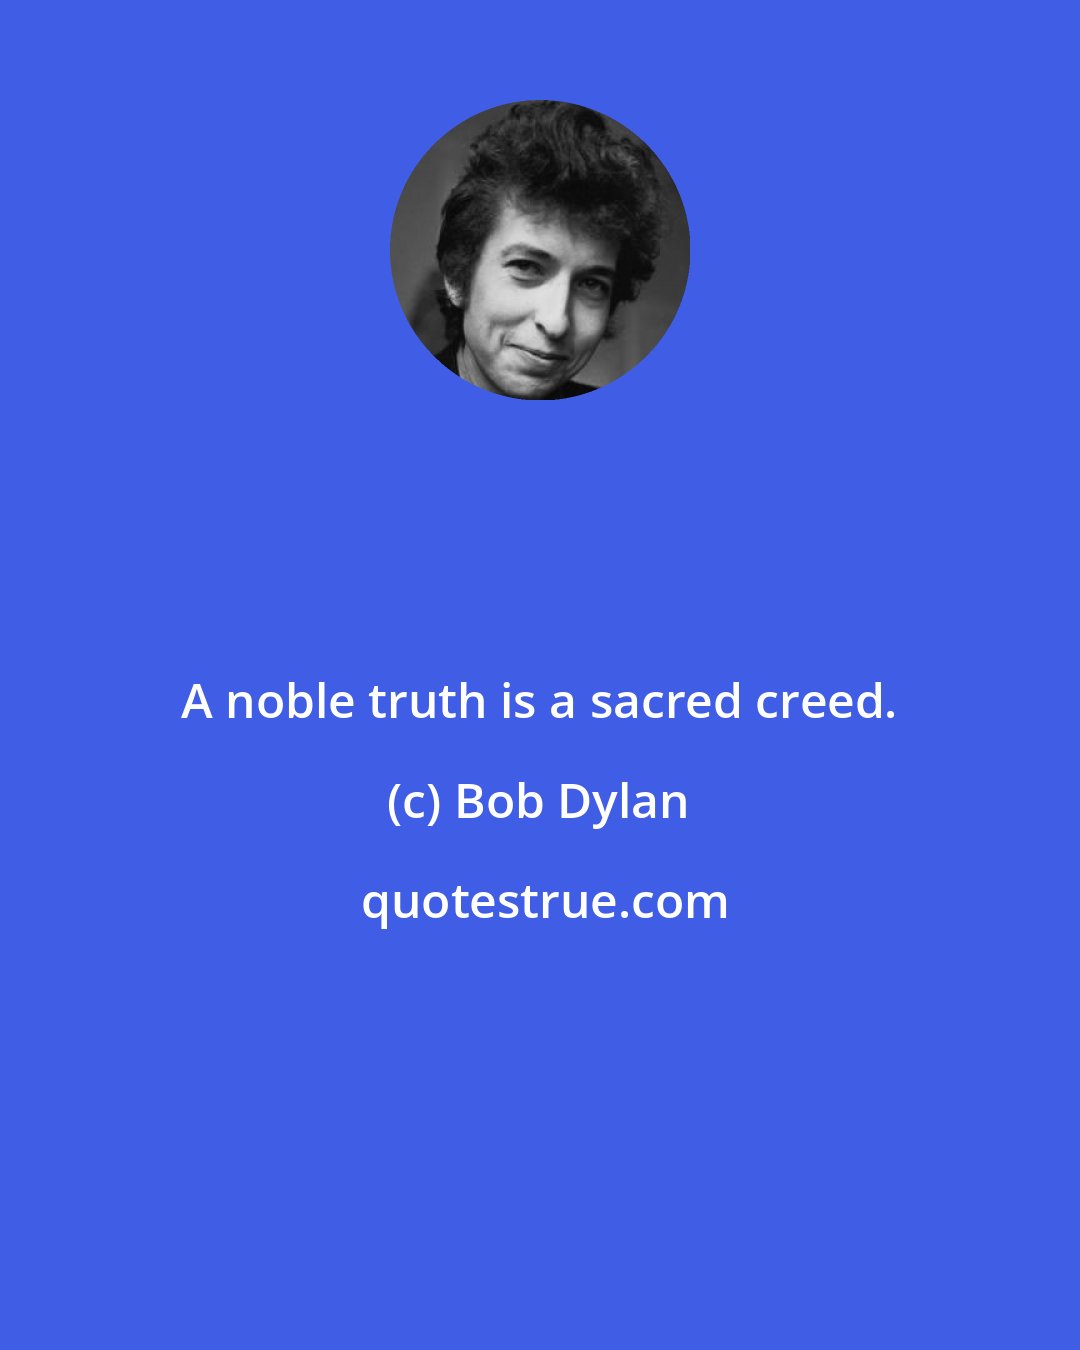 Bob Dylan: A noble truth is a sacred creed.